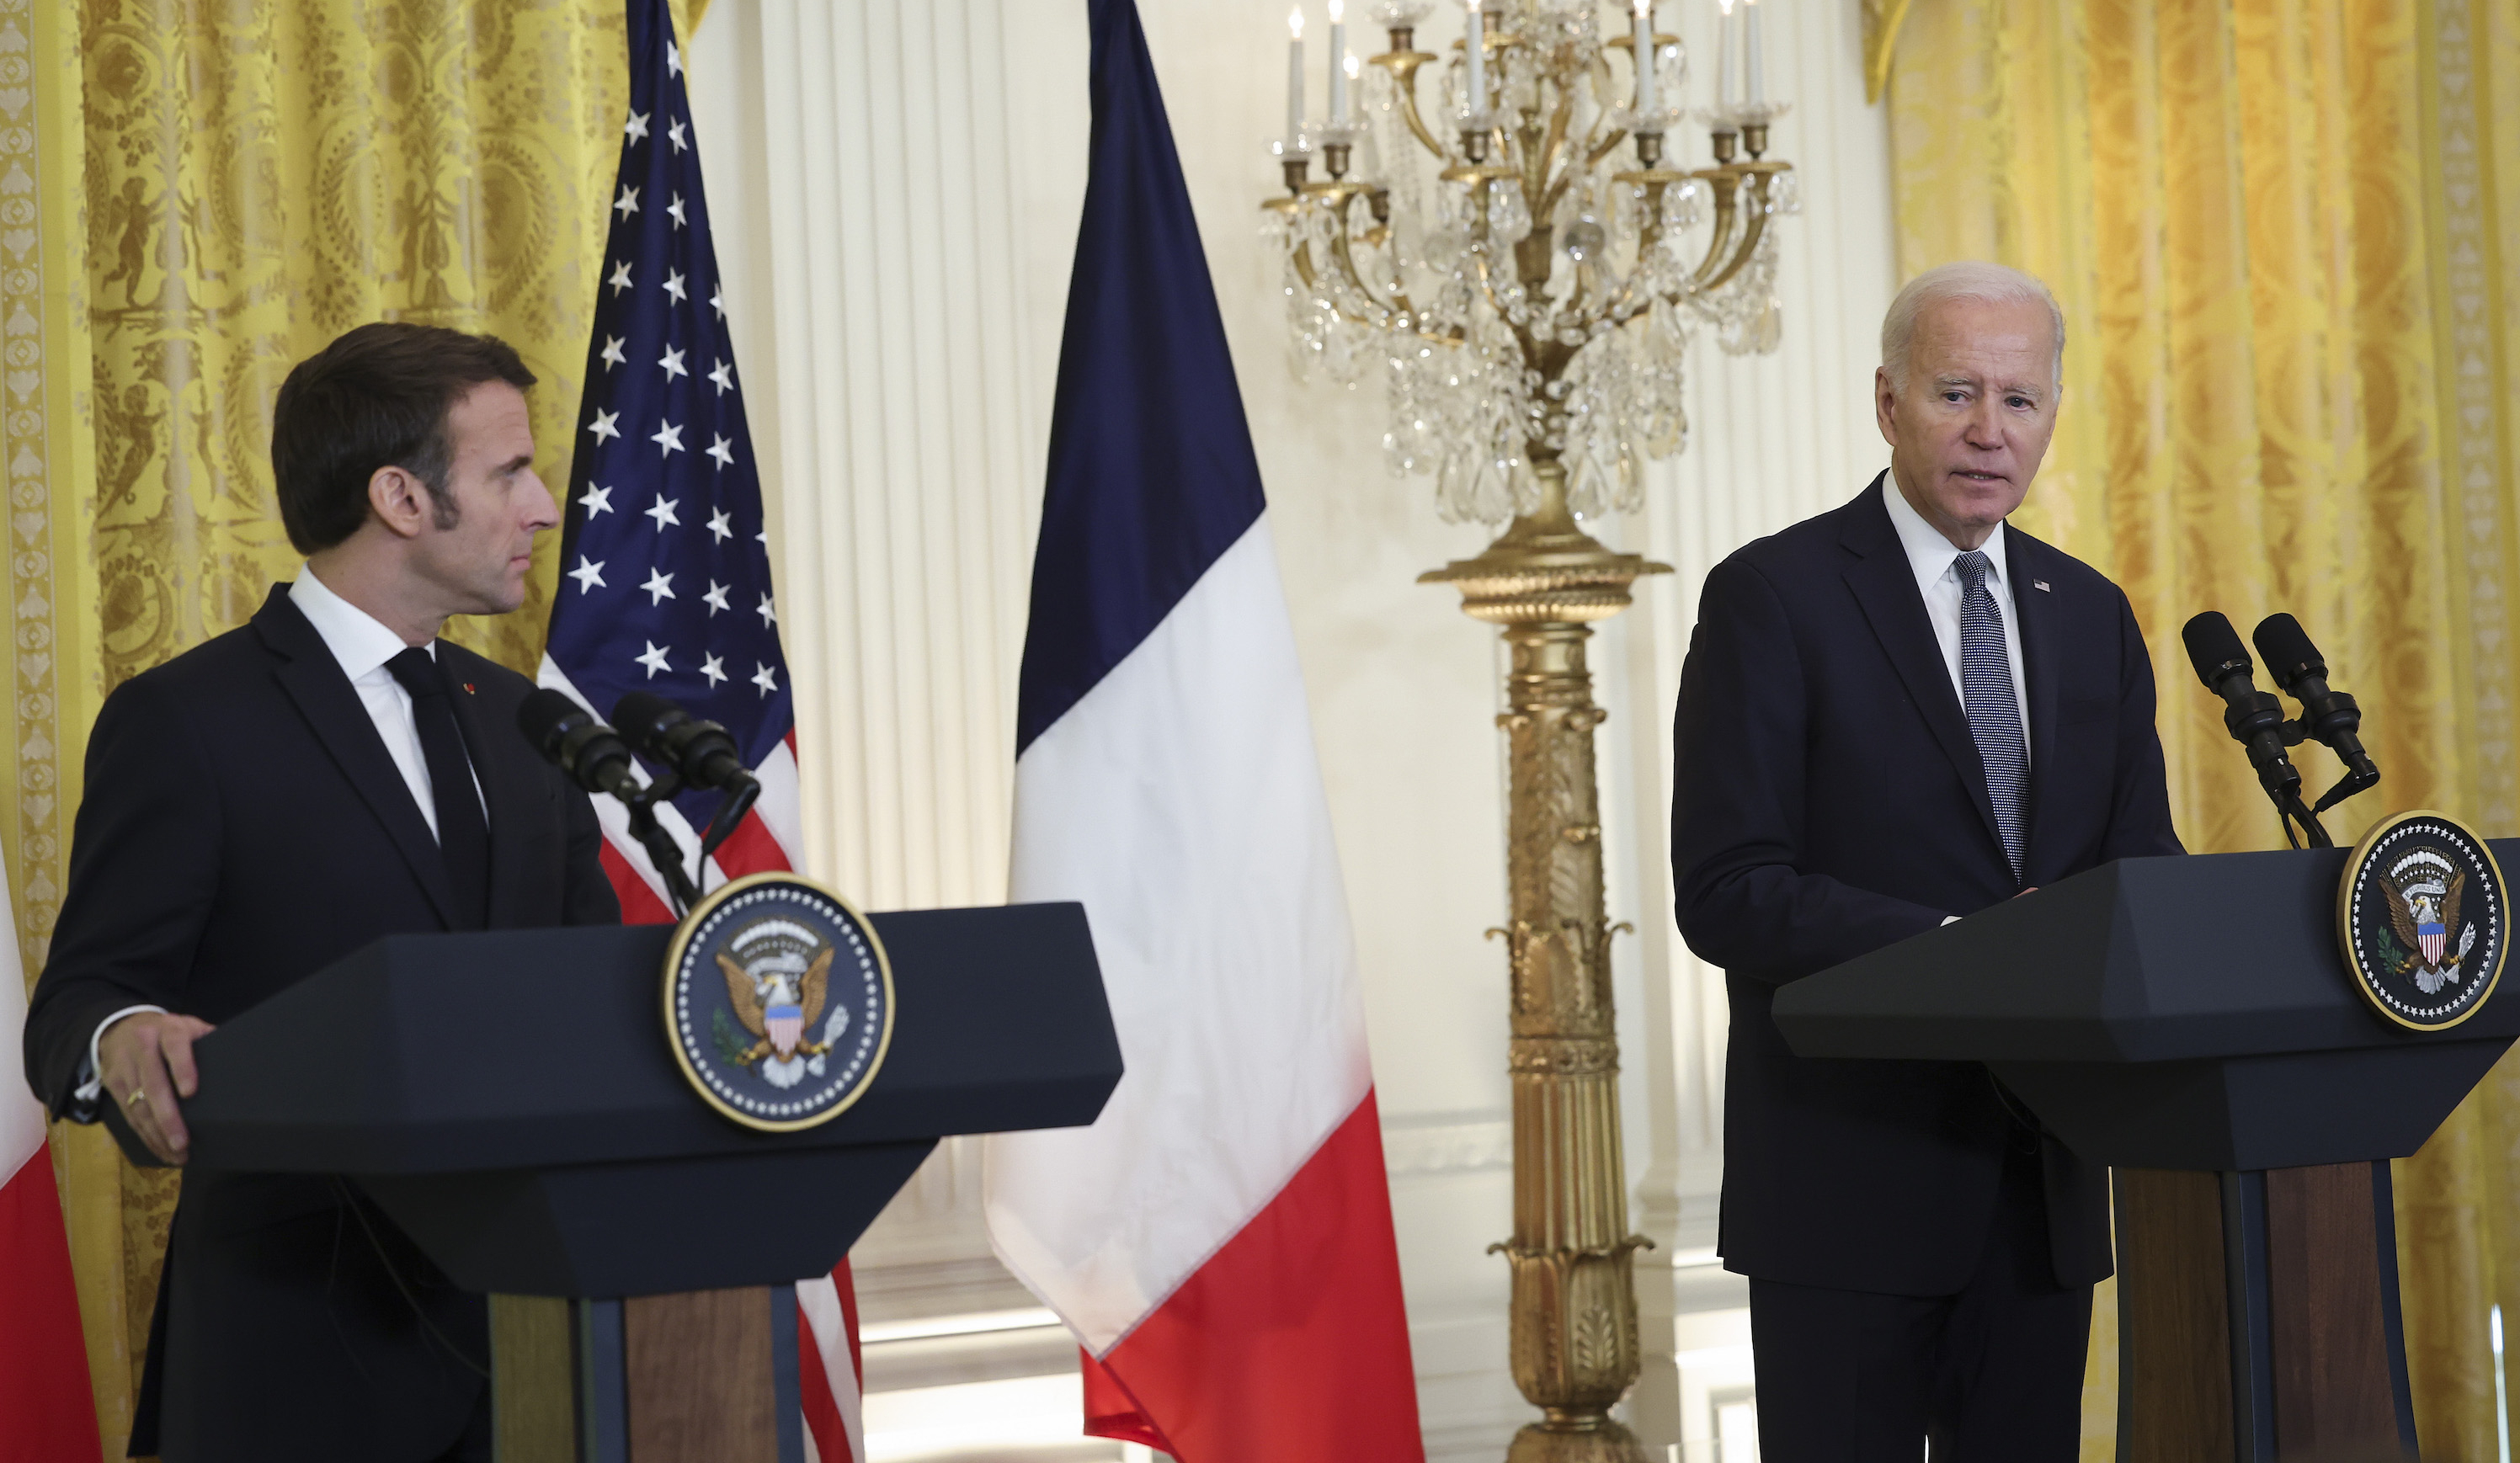 Biden, Macron Hold a Joint News Conference at White House